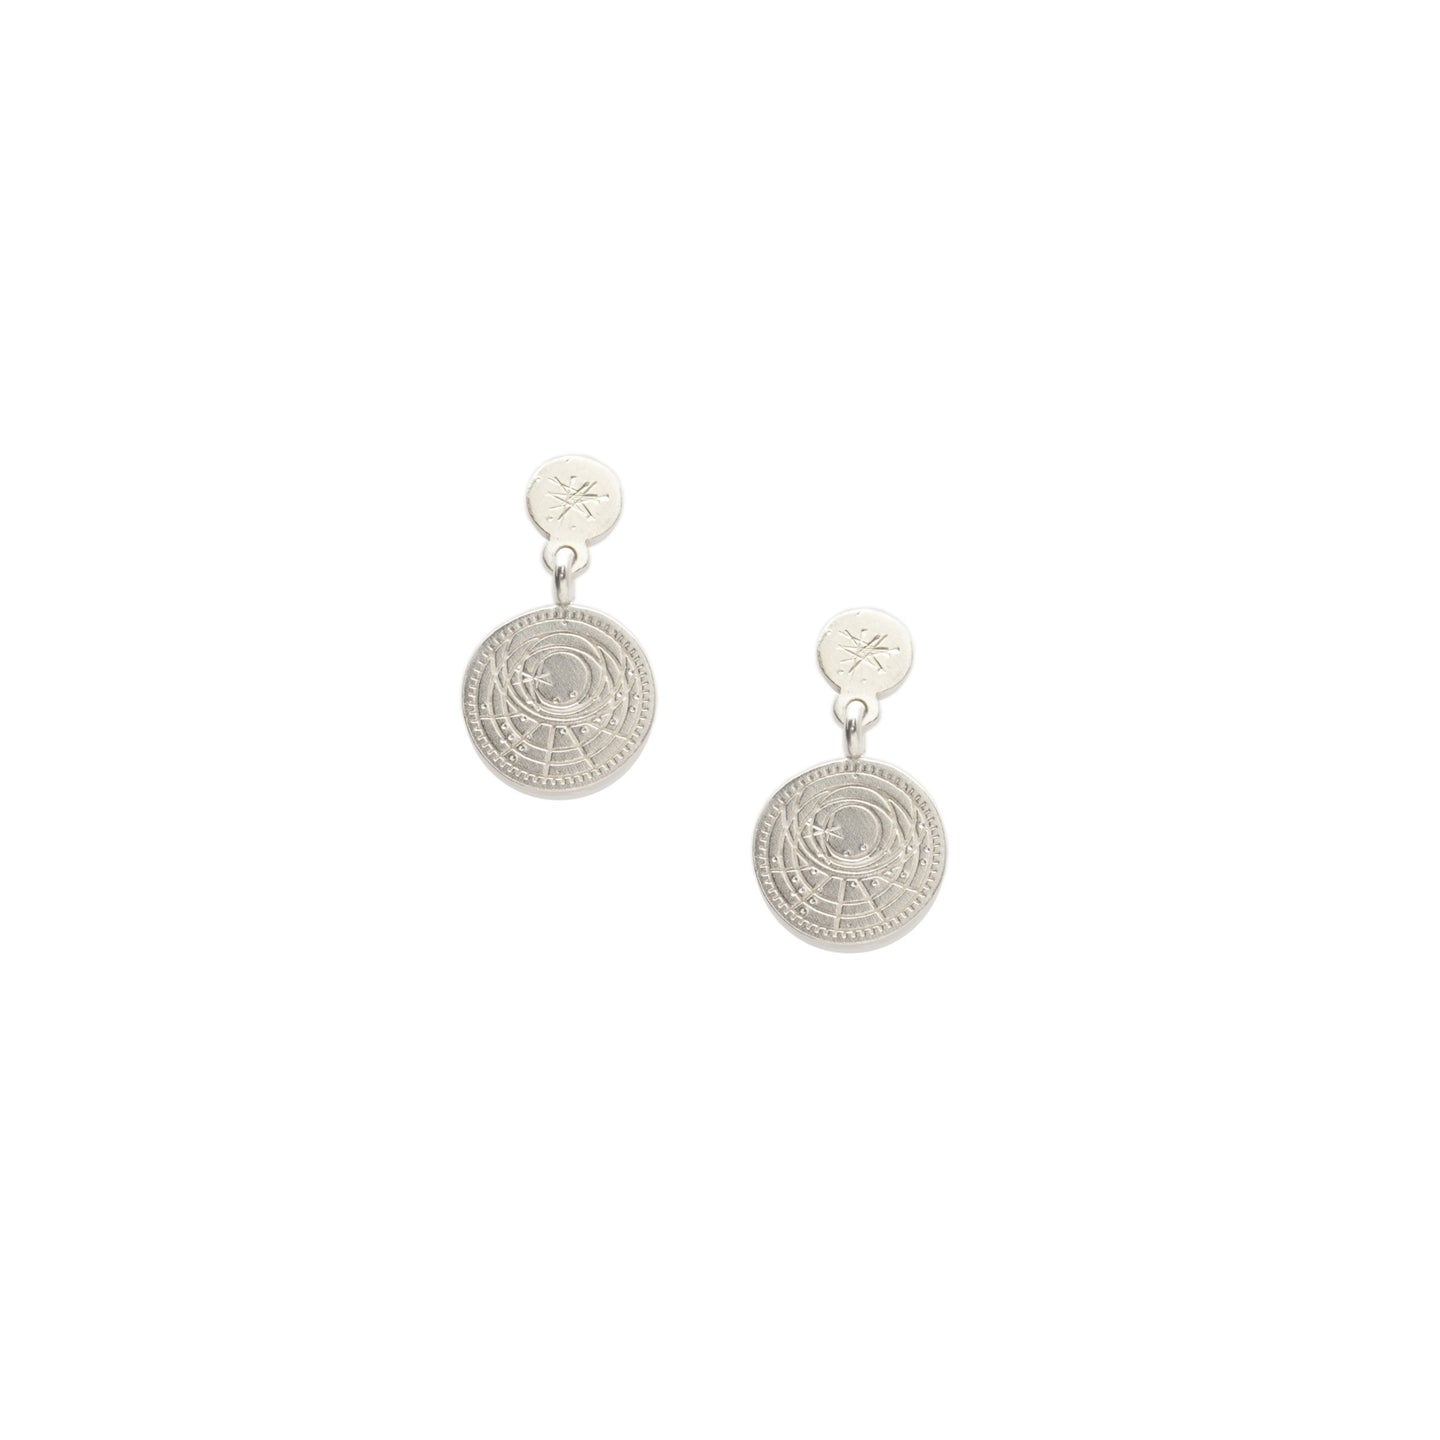 Astrolabe and Star Earrings